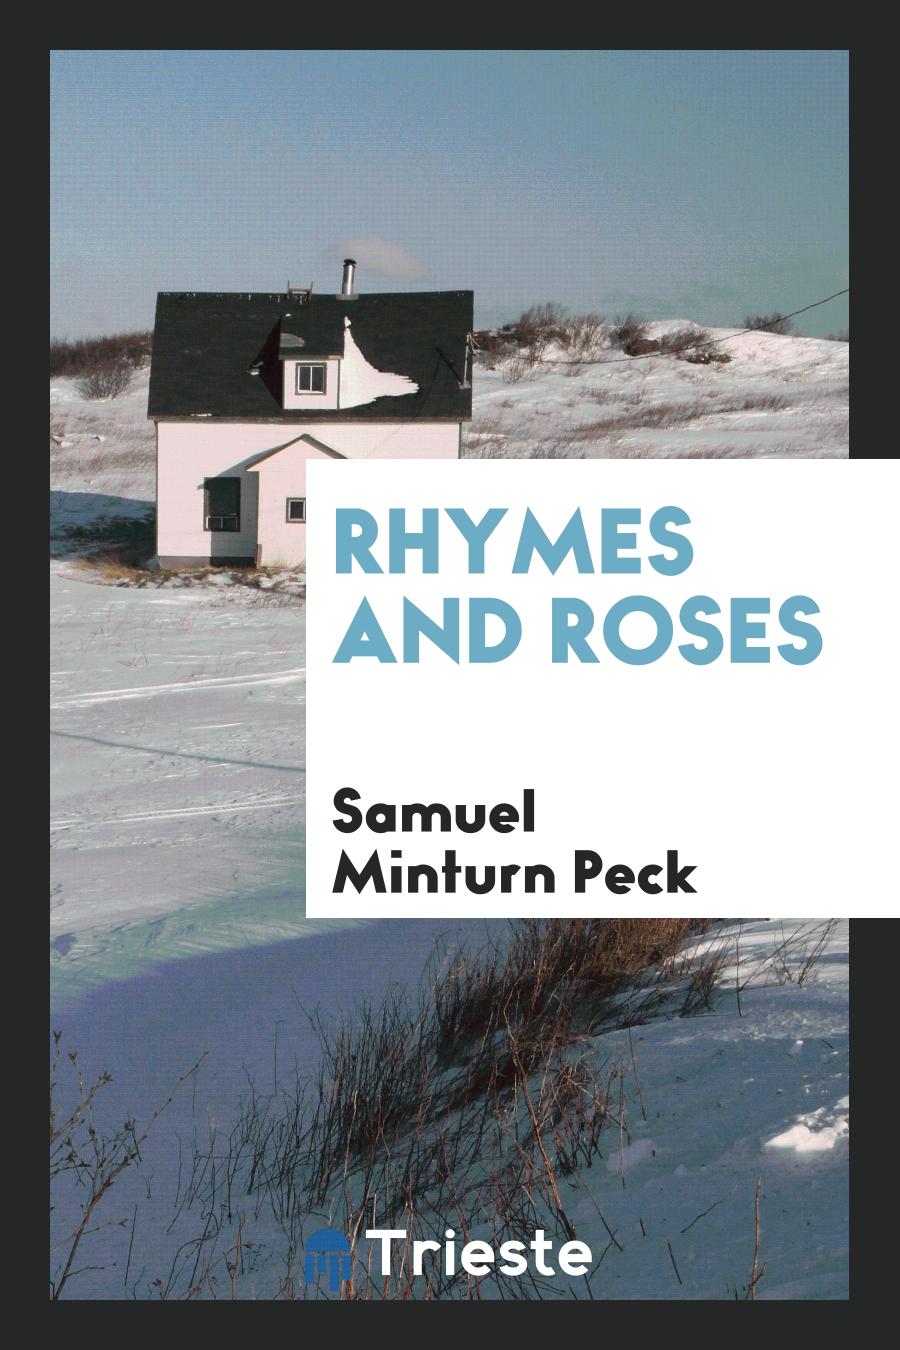 Rhymes and roses